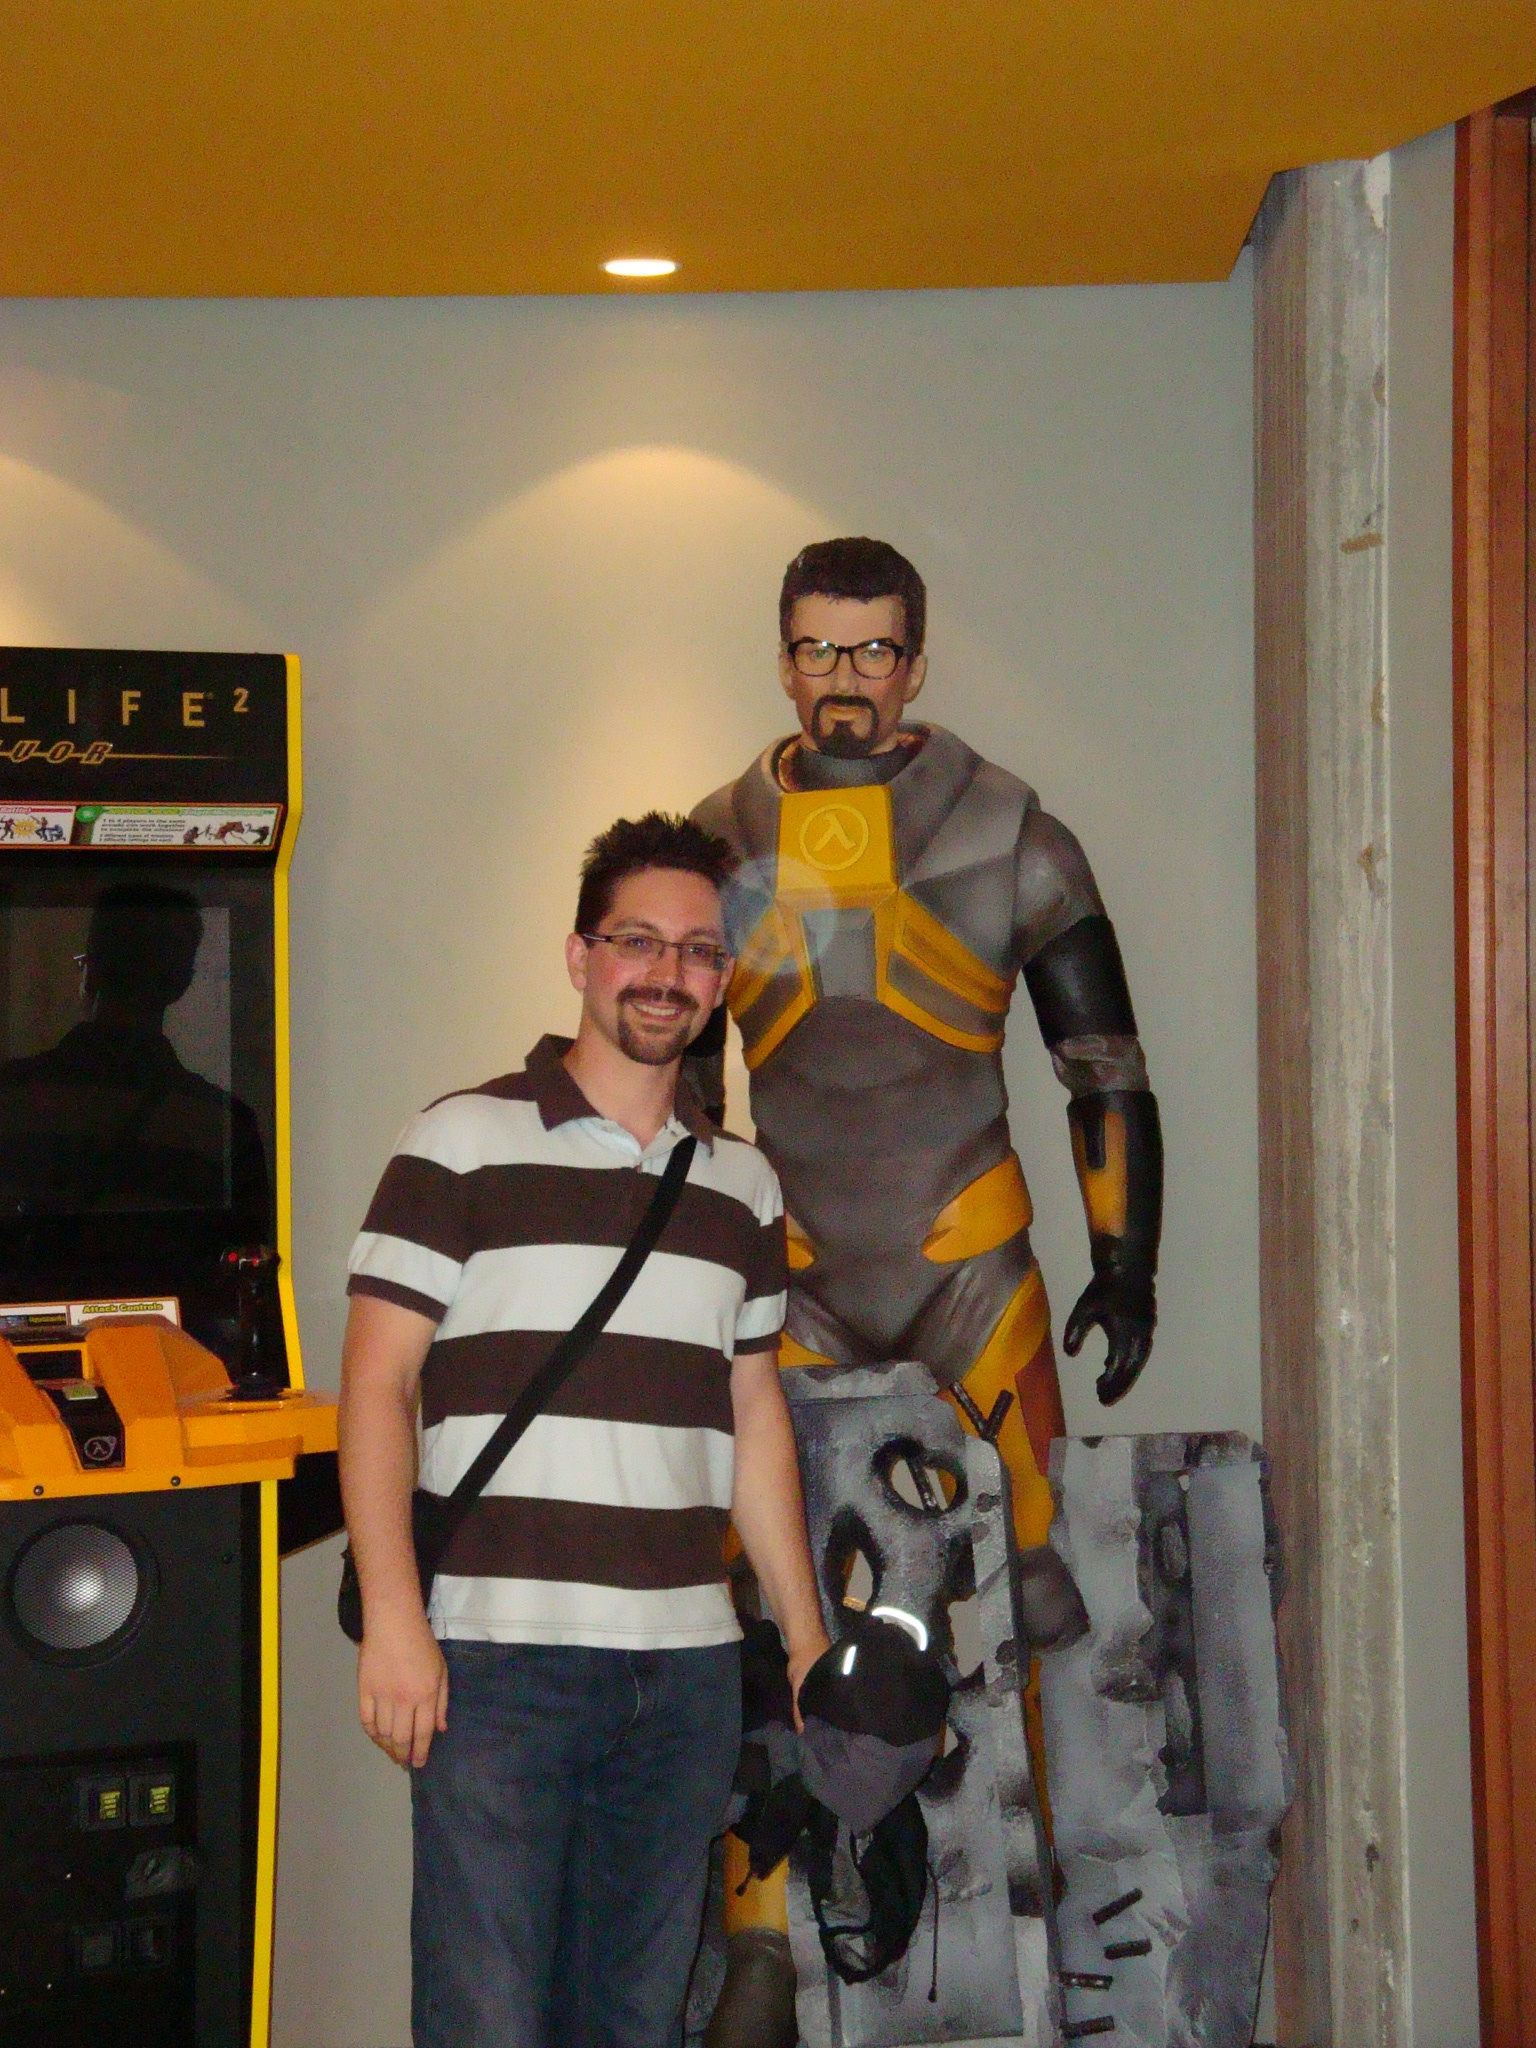 Ben with a very different haircut, standing by Gordon Freeman at Valve